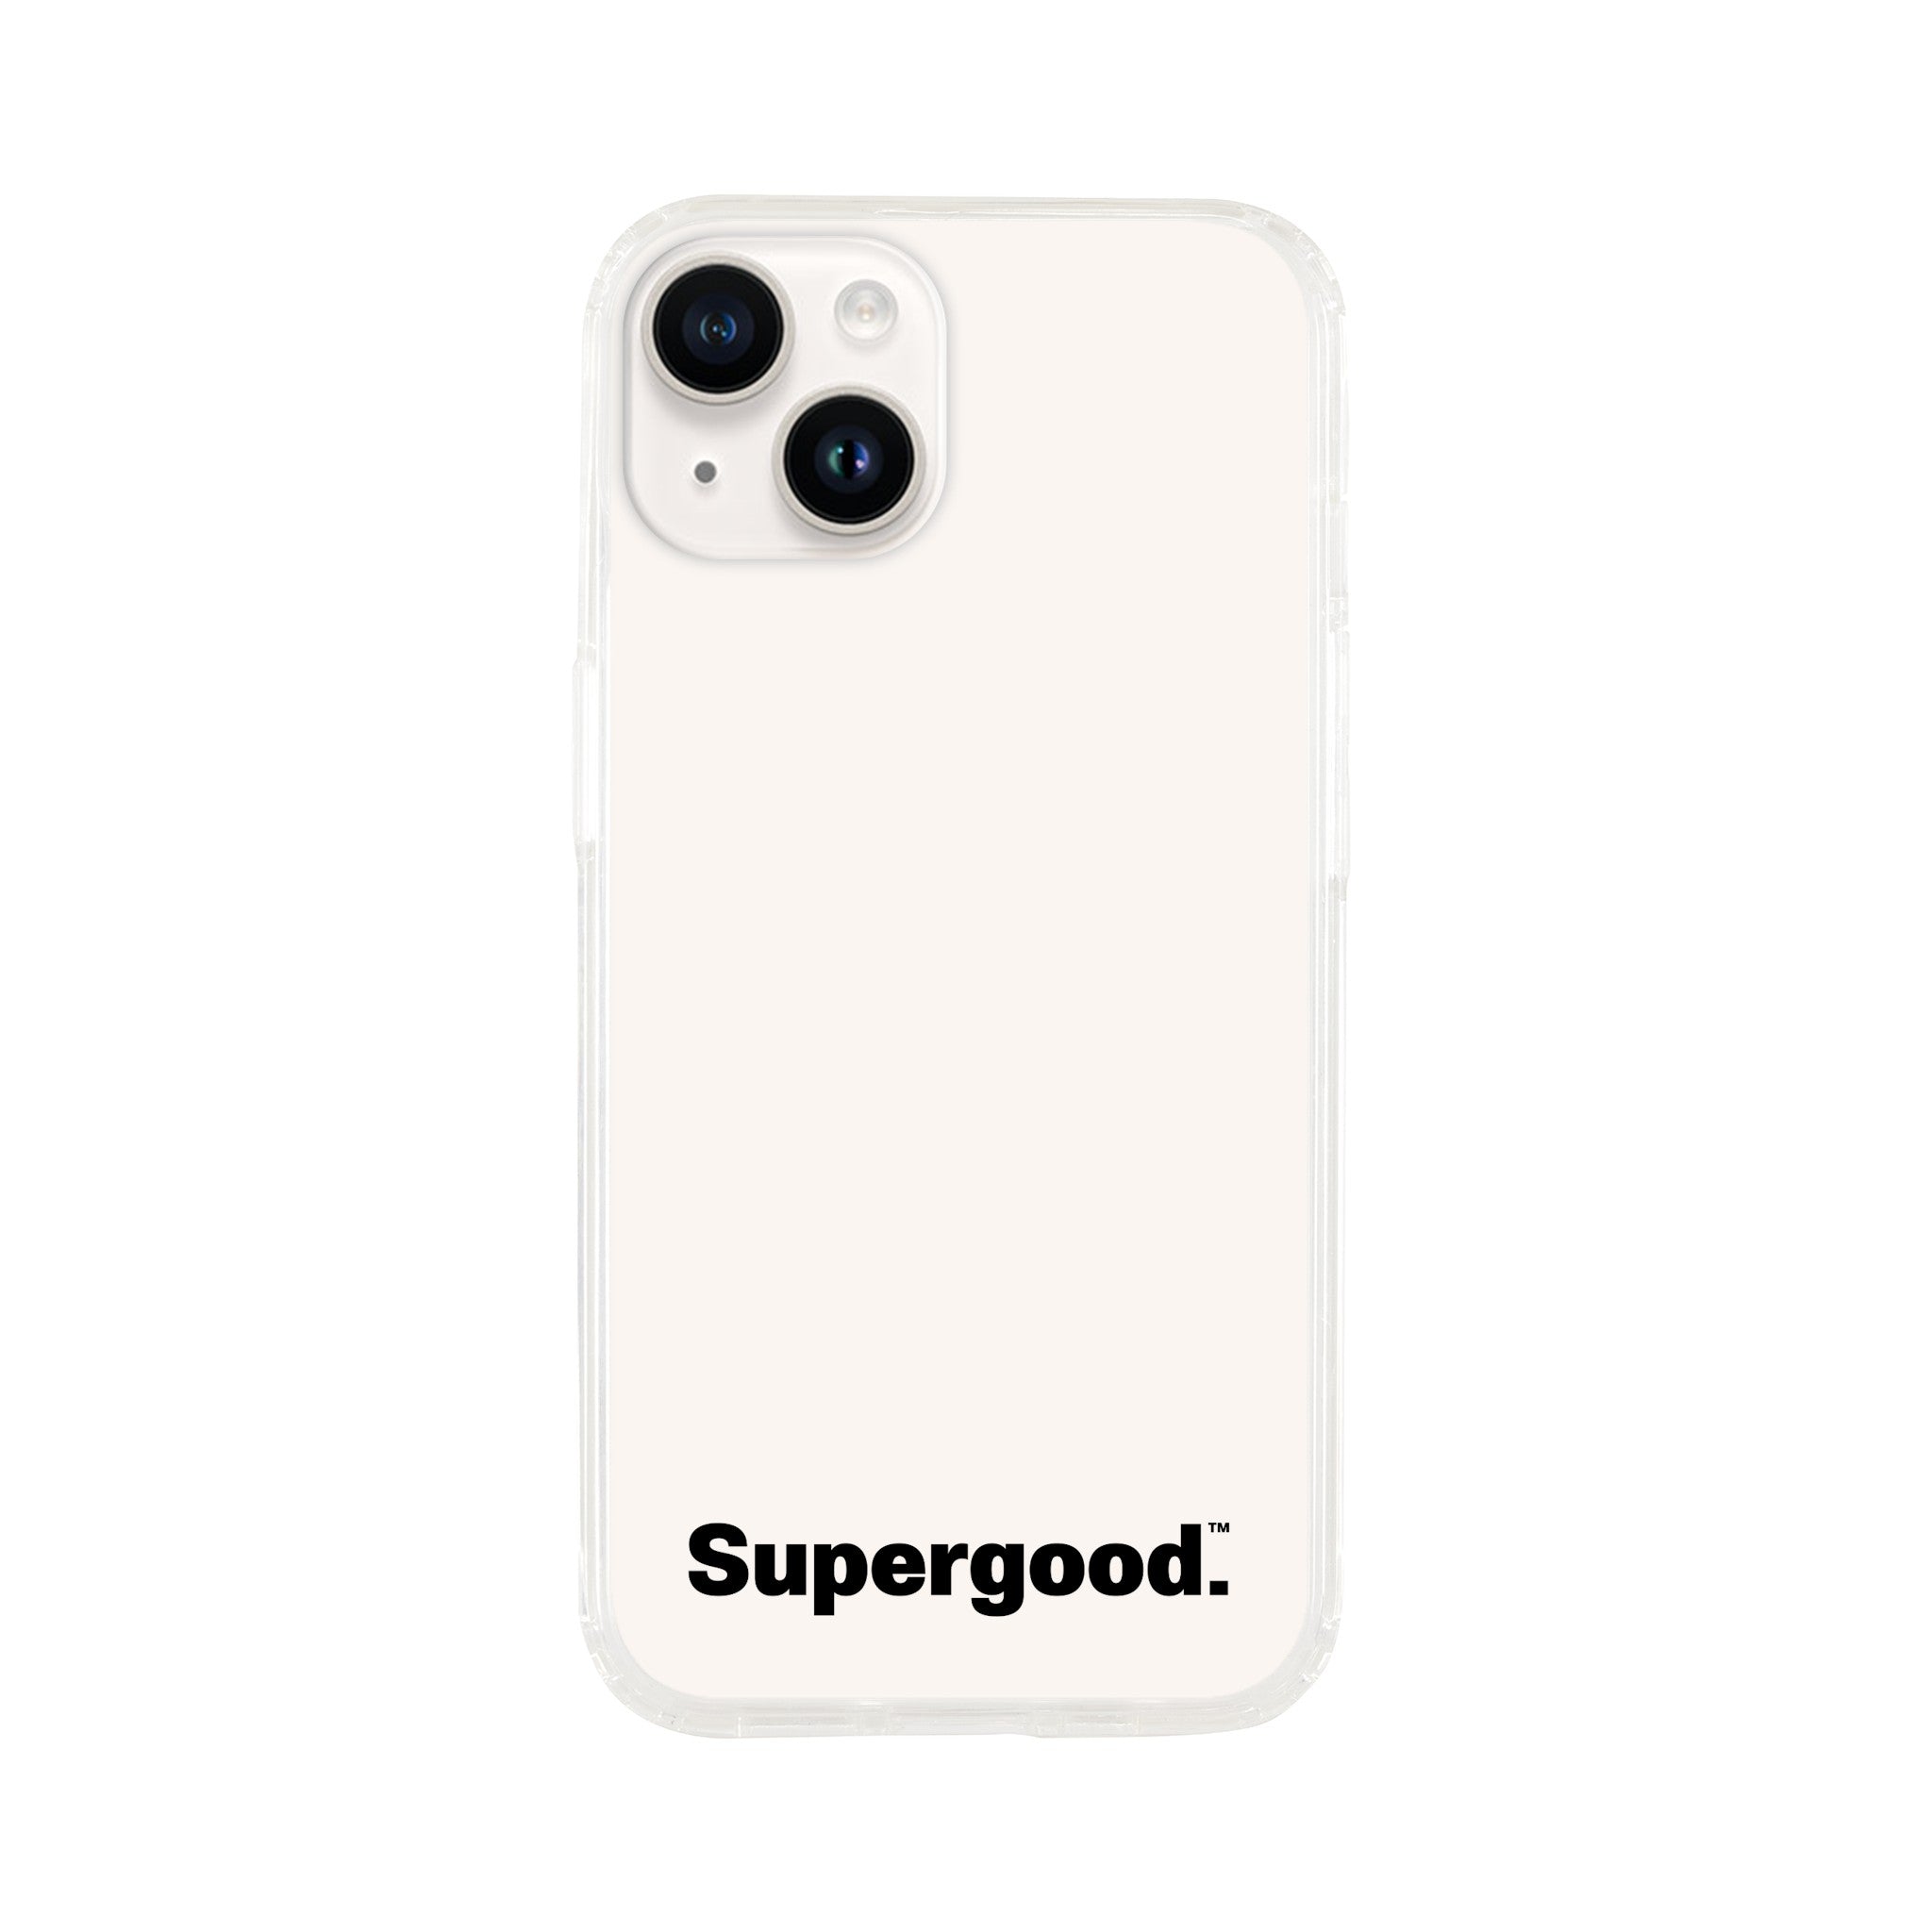 Black Text Clear Case for iPhone by Supergood.-Supergood.